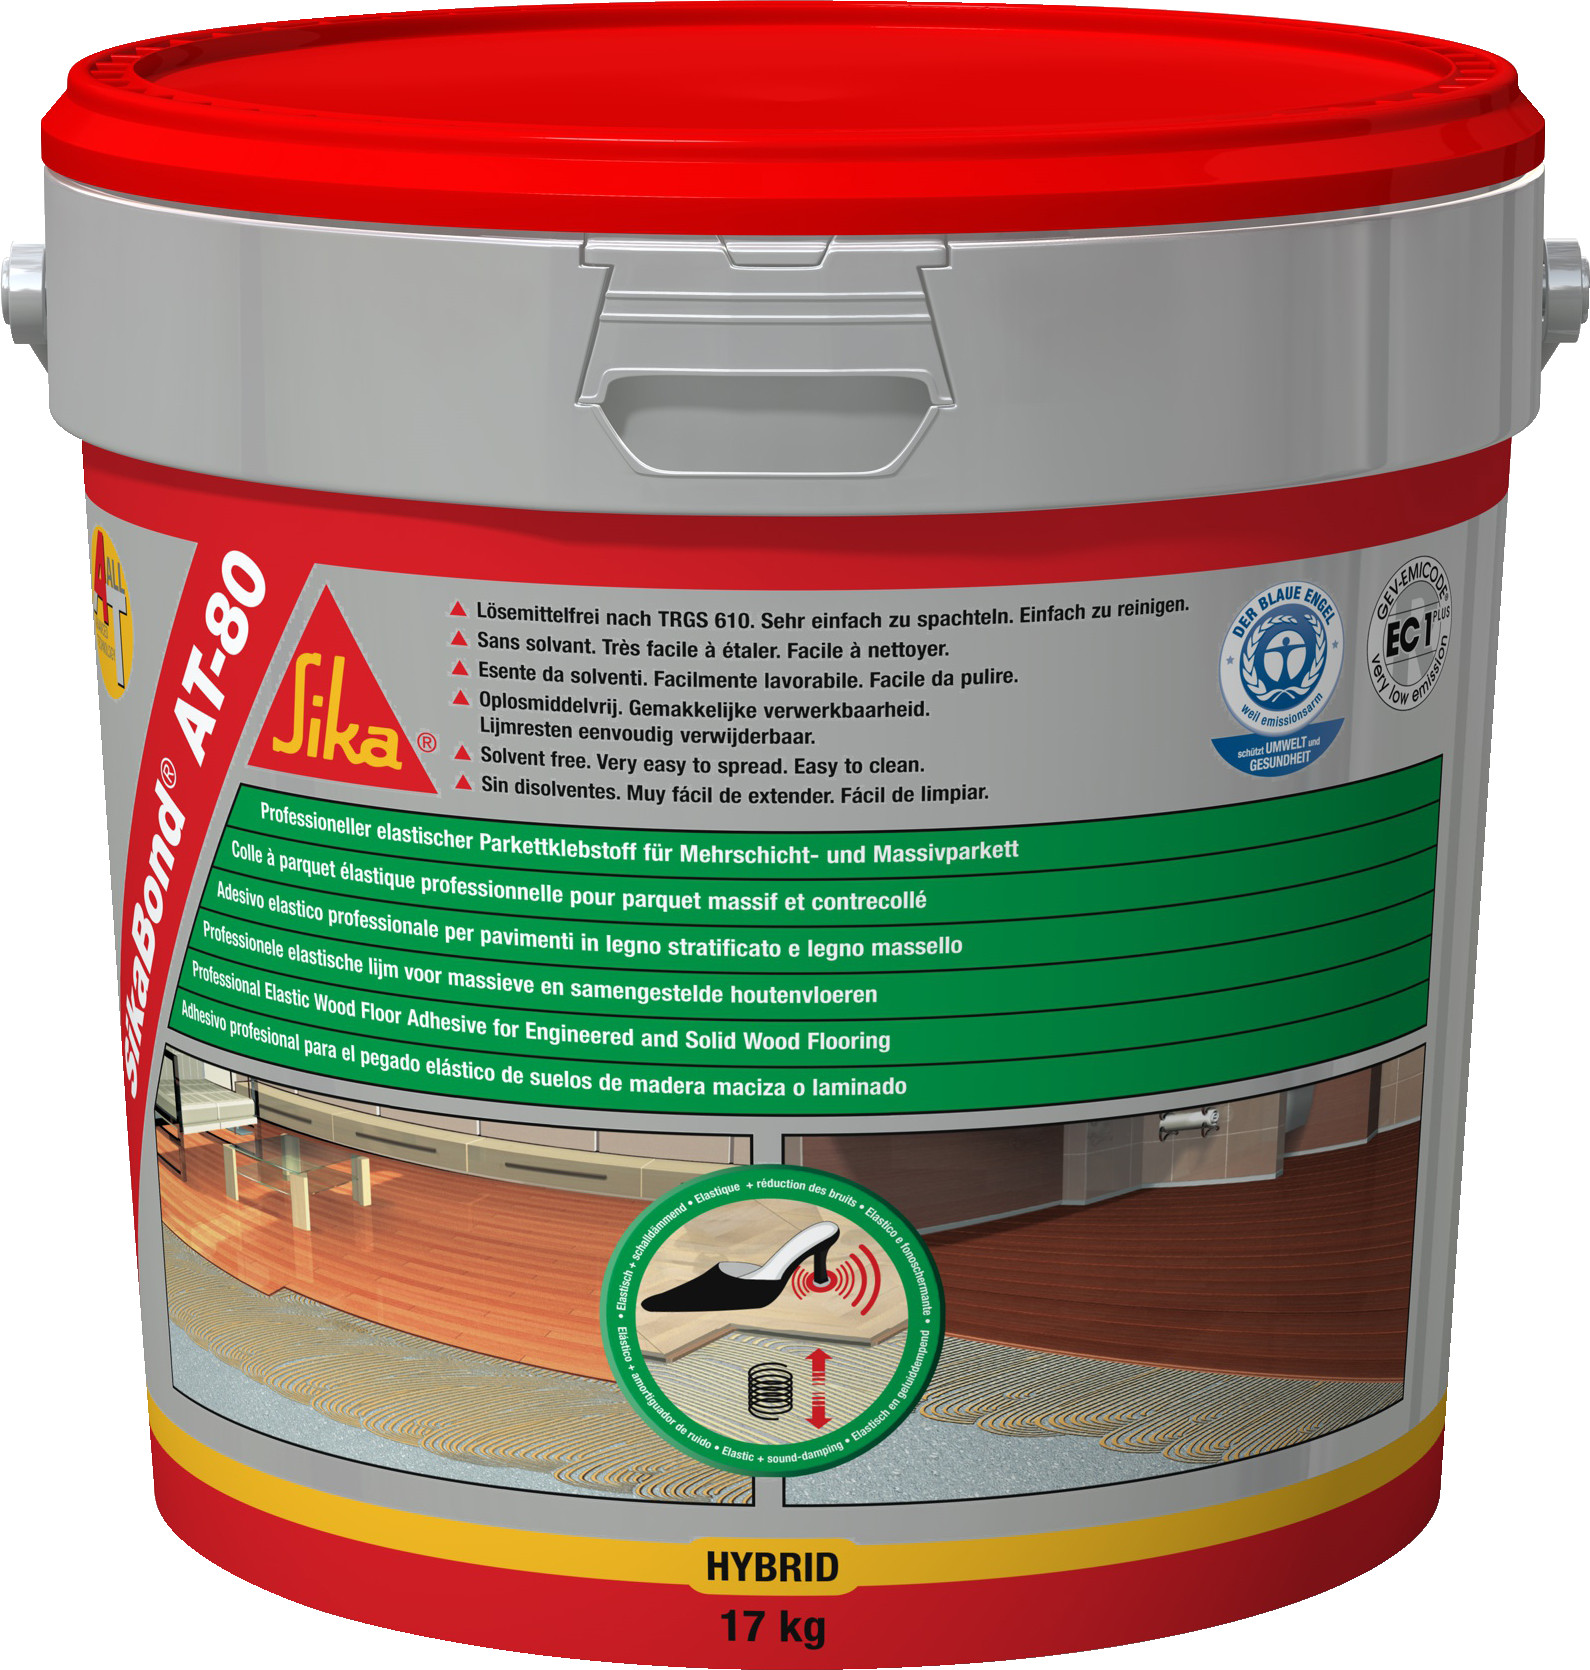 24 Lovely Sika Hardwood Floor Glue 2024 free download sika hardwood floor glue of sikabond at 80 everbuild intended for sikabond at 80 is a one component easy to use solvent free elastic wood floor bonding system lay on all mineral substrates i